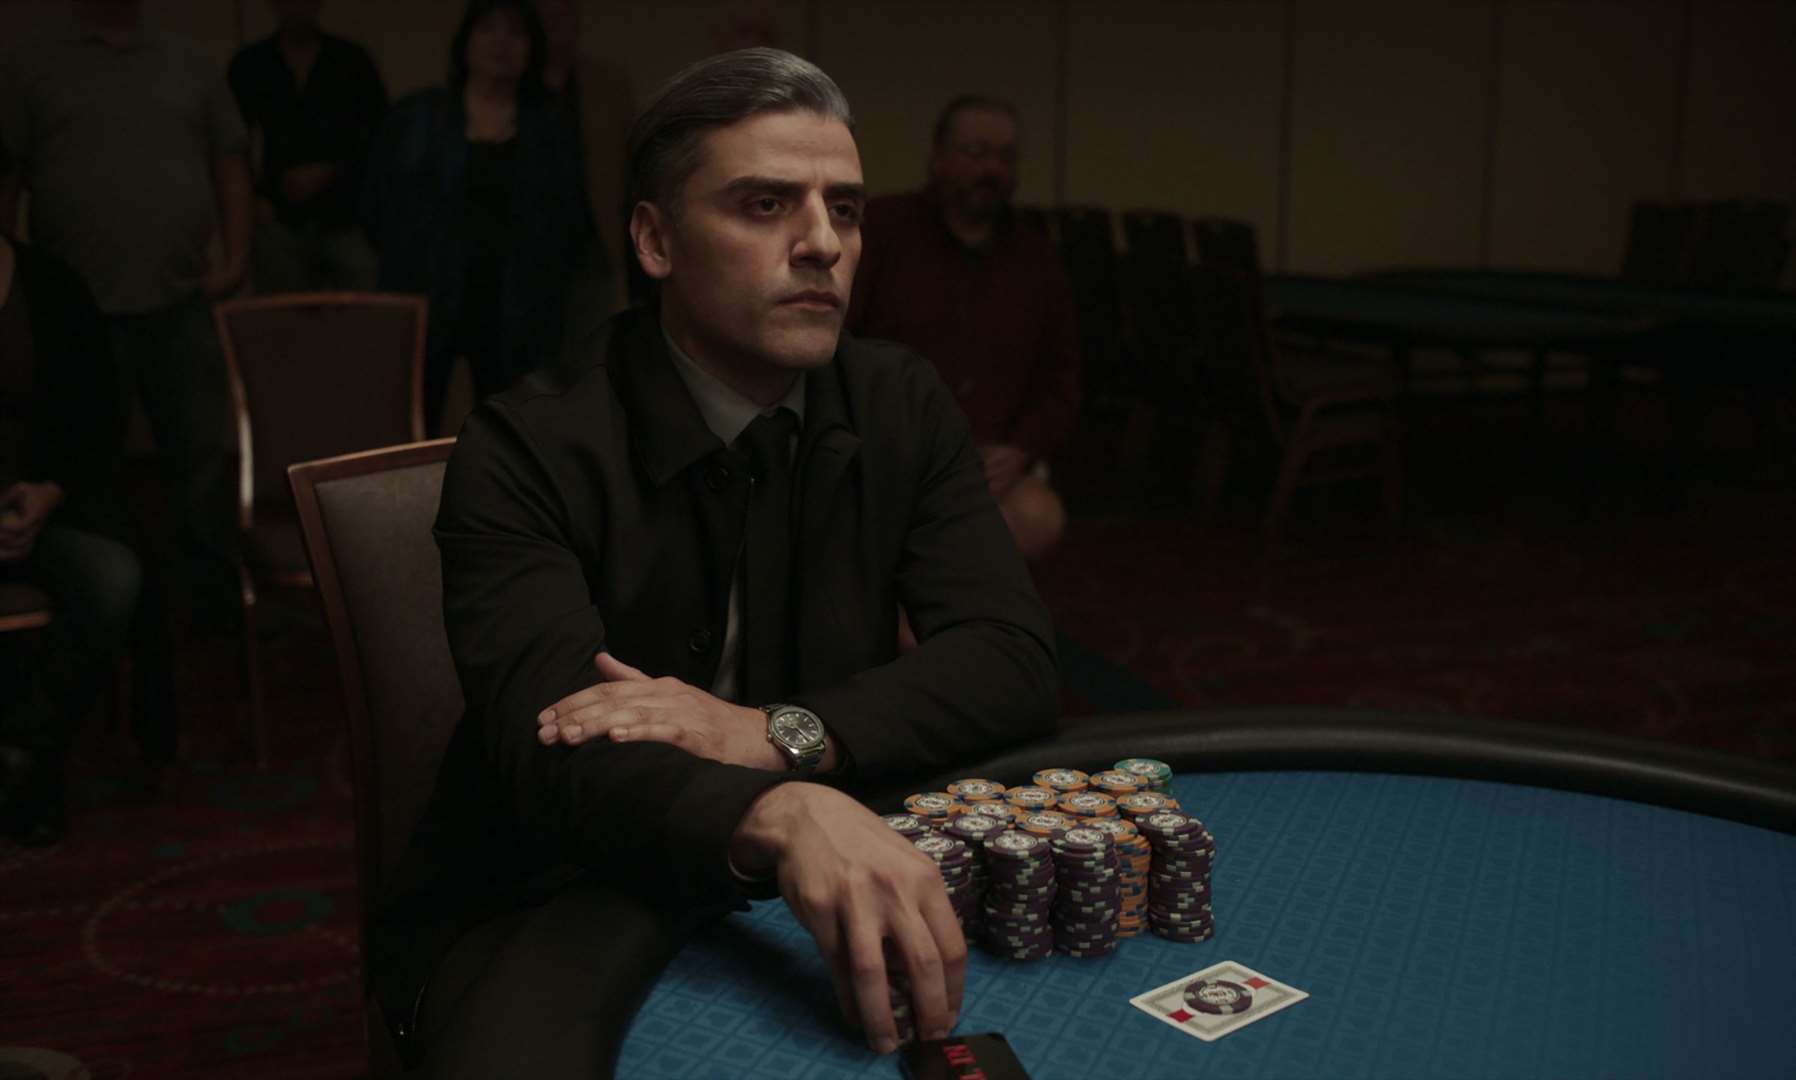 Oscar Isaac stars as William Tell in The Card Counter. Picture: Focus Features